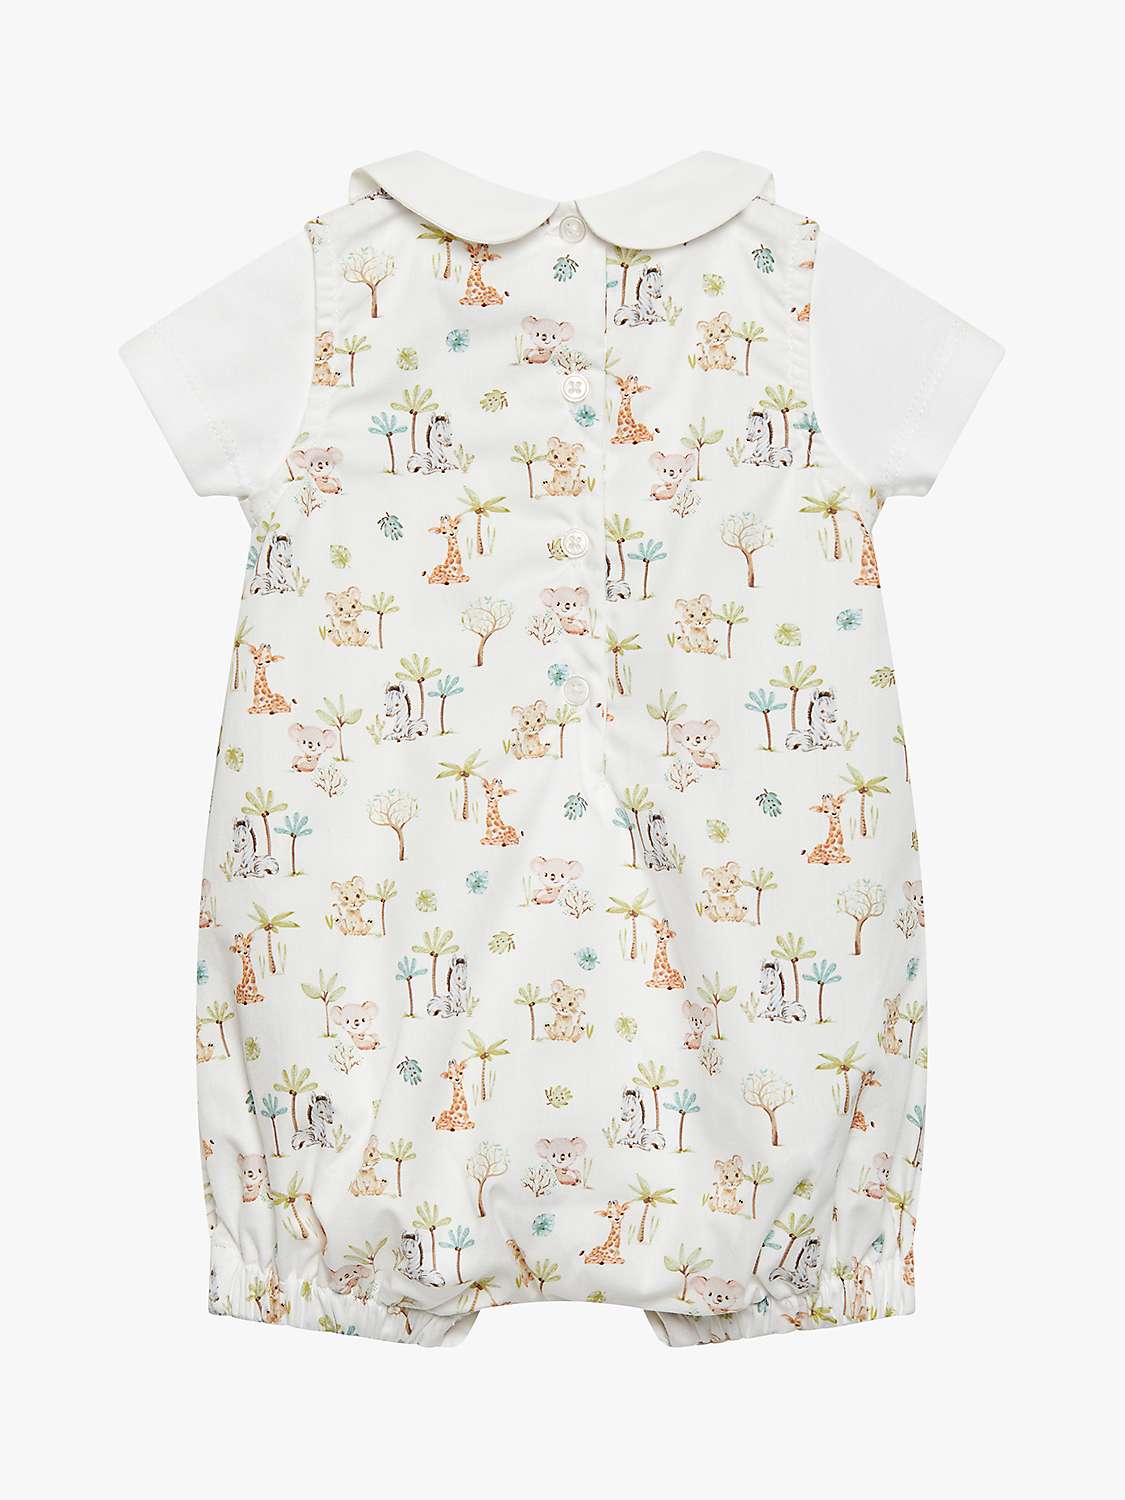 Buy Trotters Baby Augustus And Friends Romper, White/Multi Online at johnlewis.com